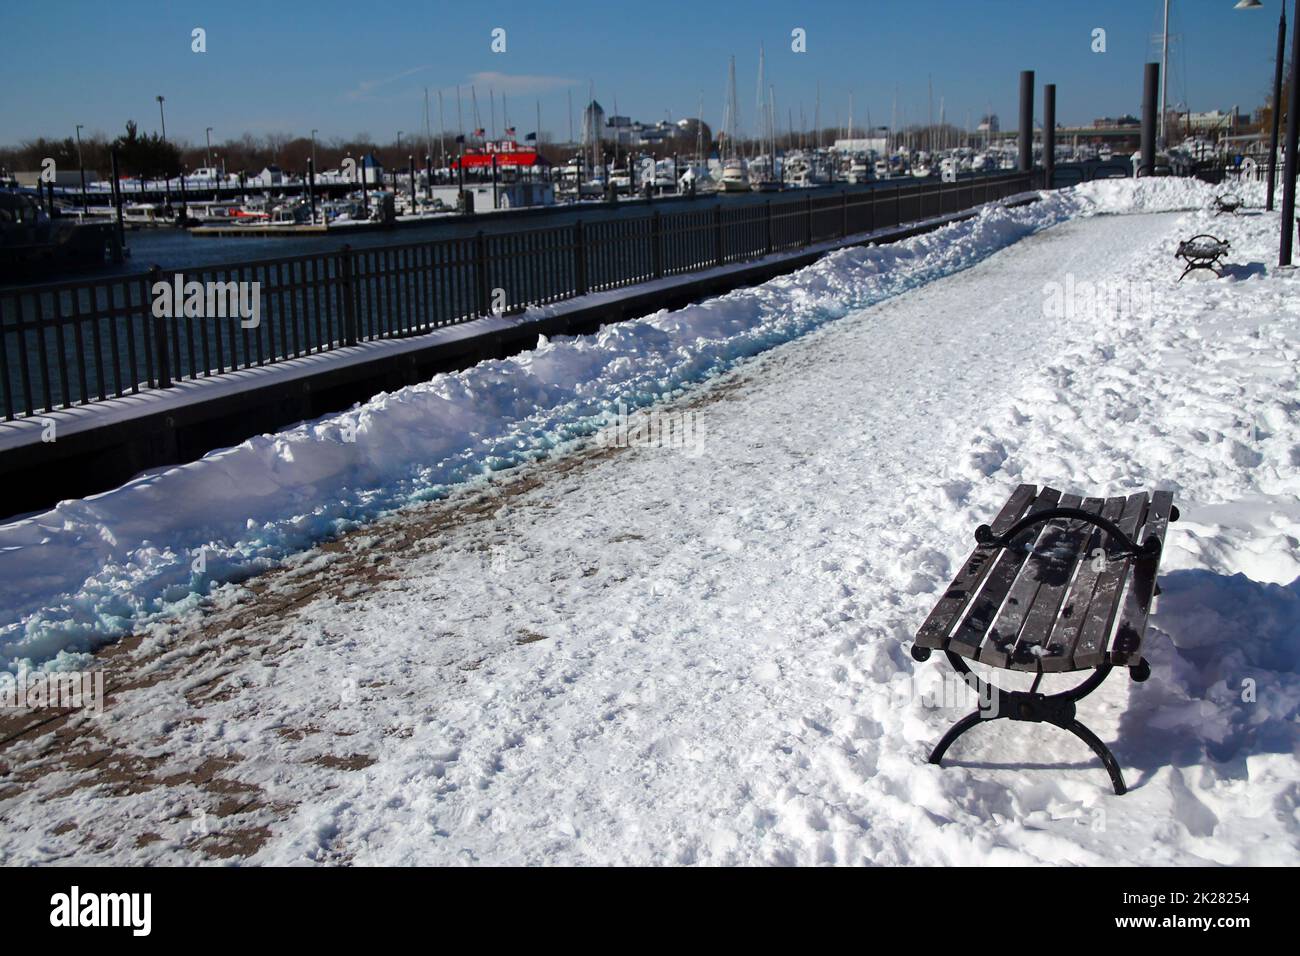 The path in the snow and the bench on the Morris Channel Basin Walkaway Stock Photo